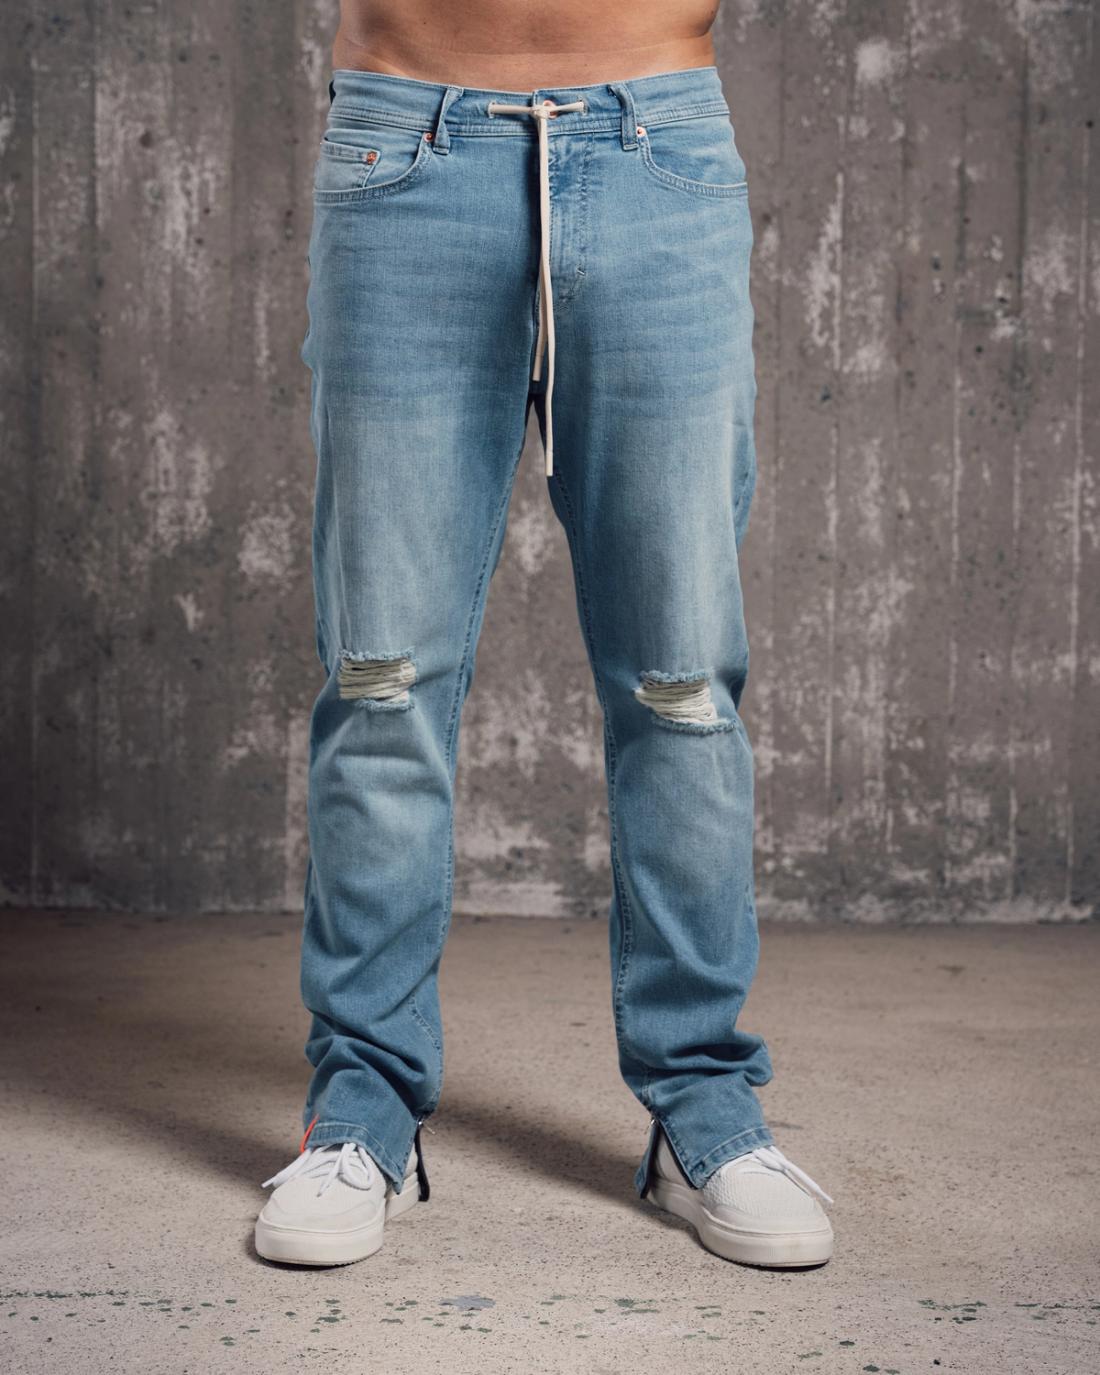 The Jeans With Holes